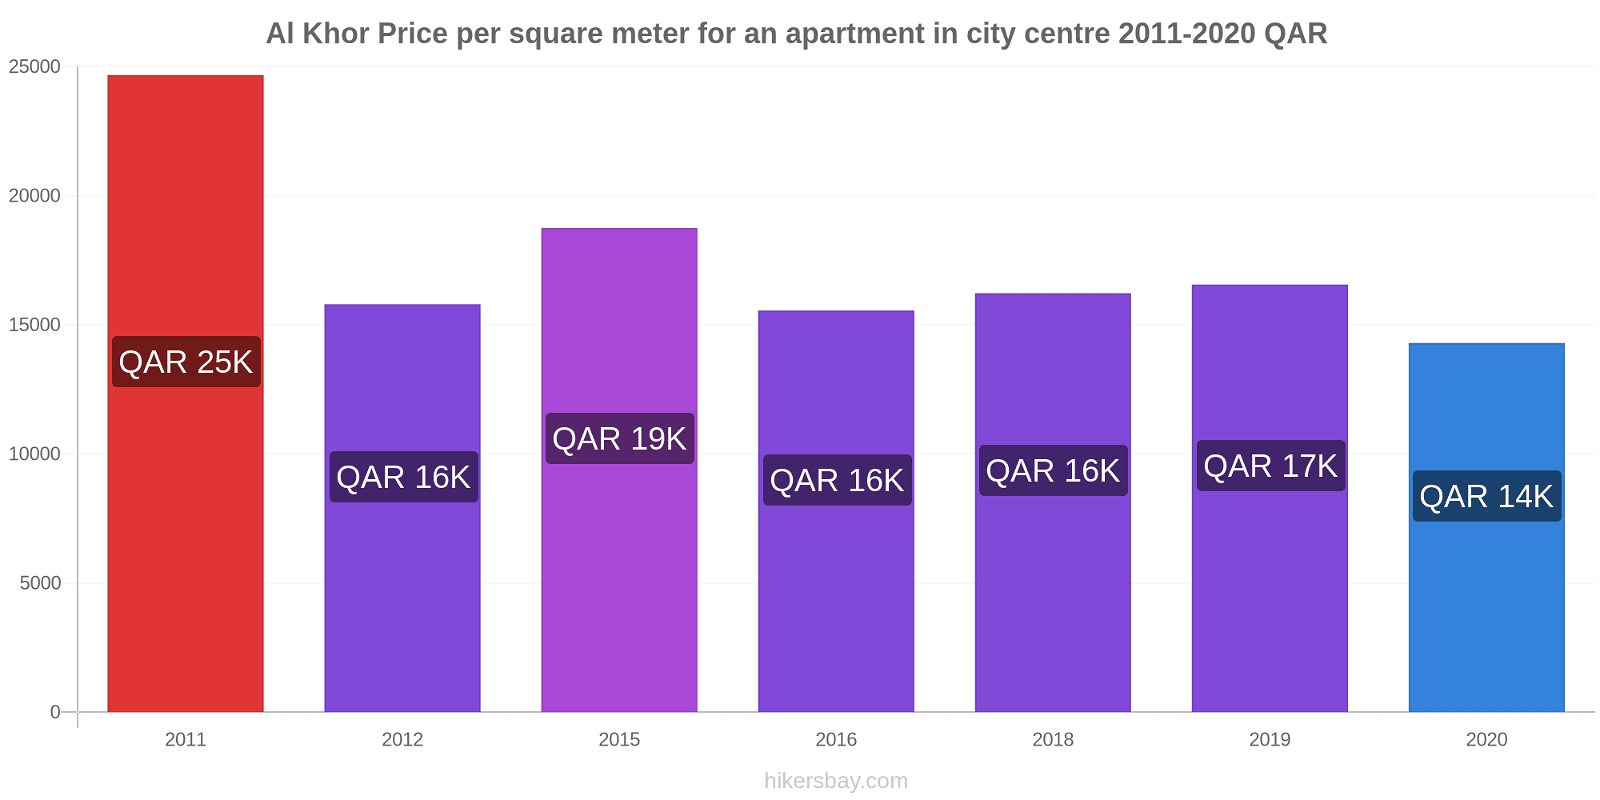 Al Khor price changes Price per square meter for an apartment in city centre hikersbay.com